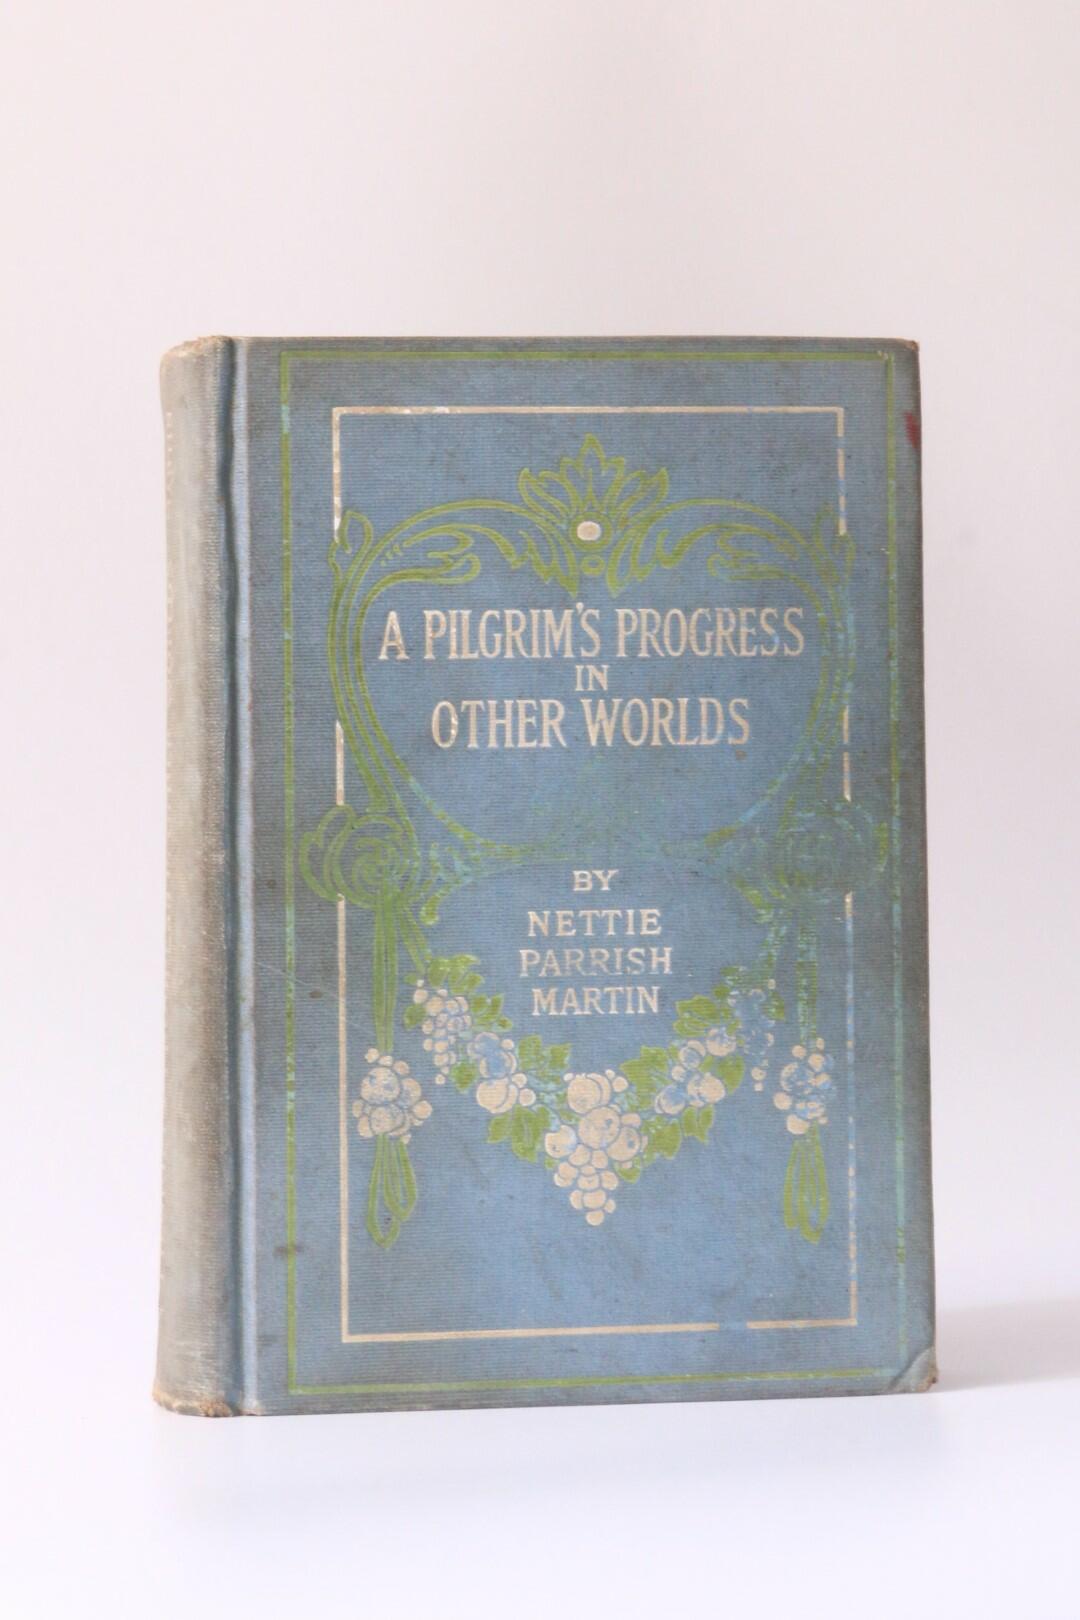 Nettie Parrish Martin - A Pilgrim's Progress in Other Worlds - Mayhew Publishing Company, 1908, First Edition.